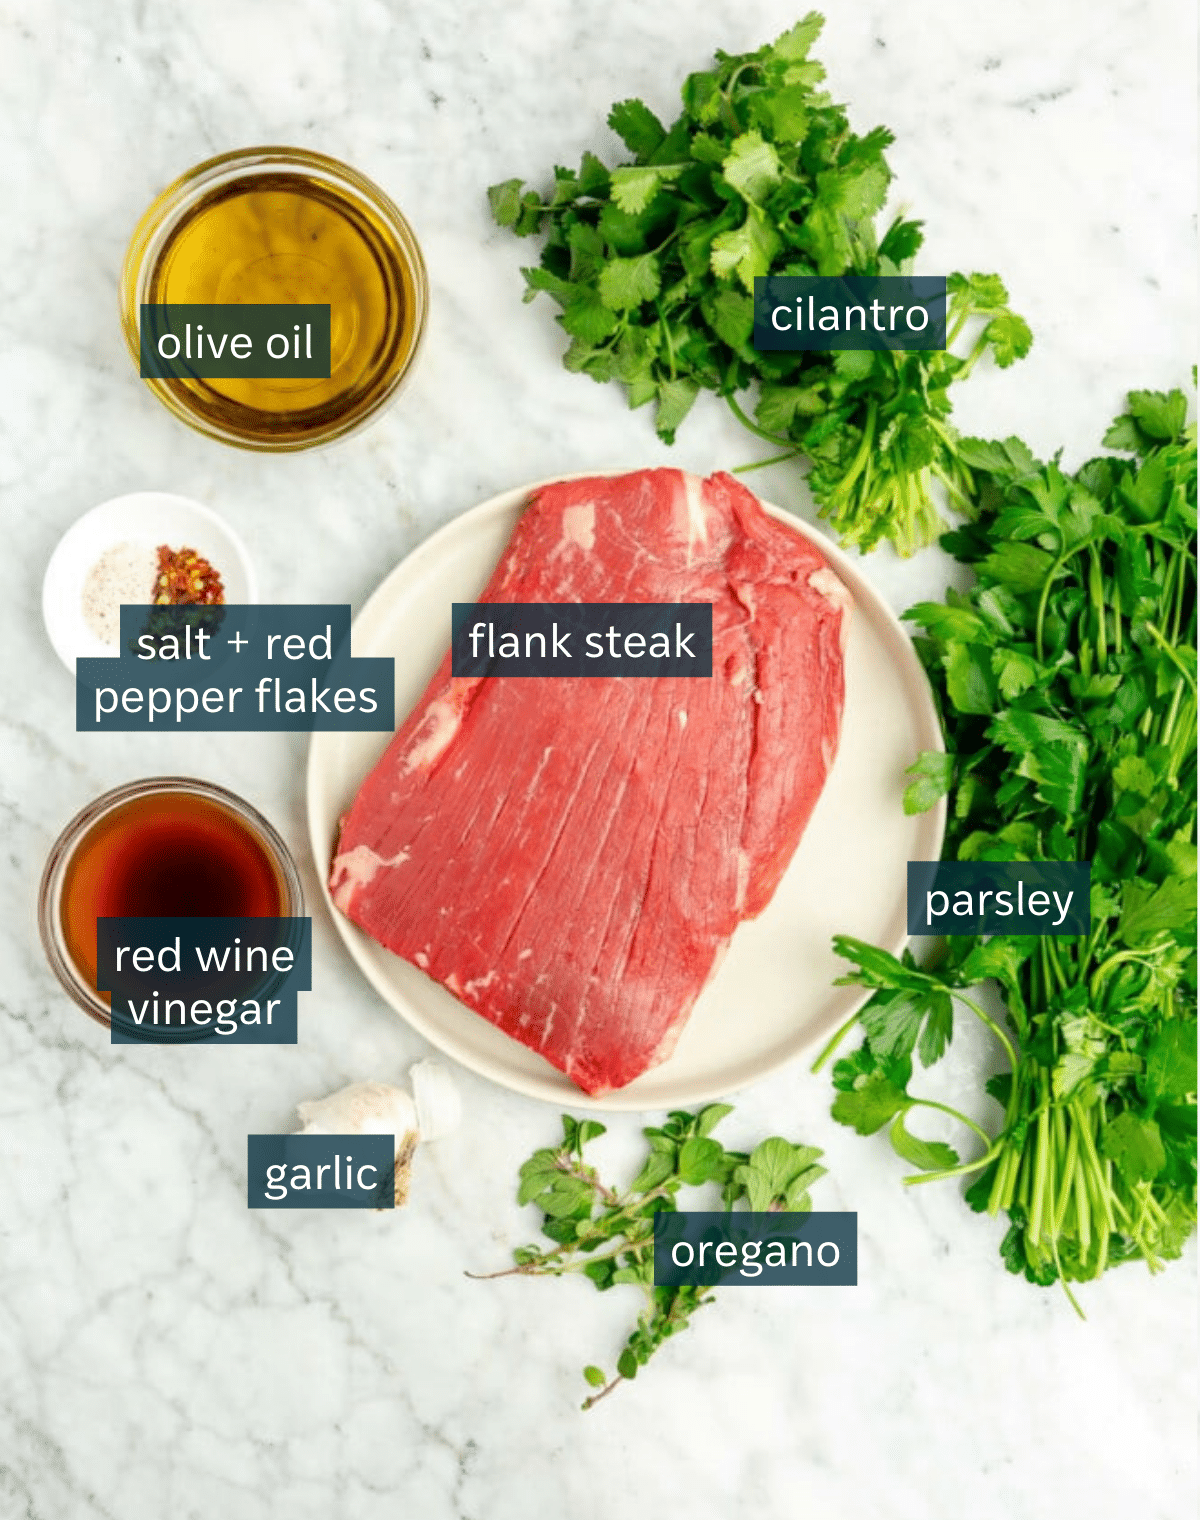 Ingredients for flank steak with chimichurri sauce sit on a marble countertop